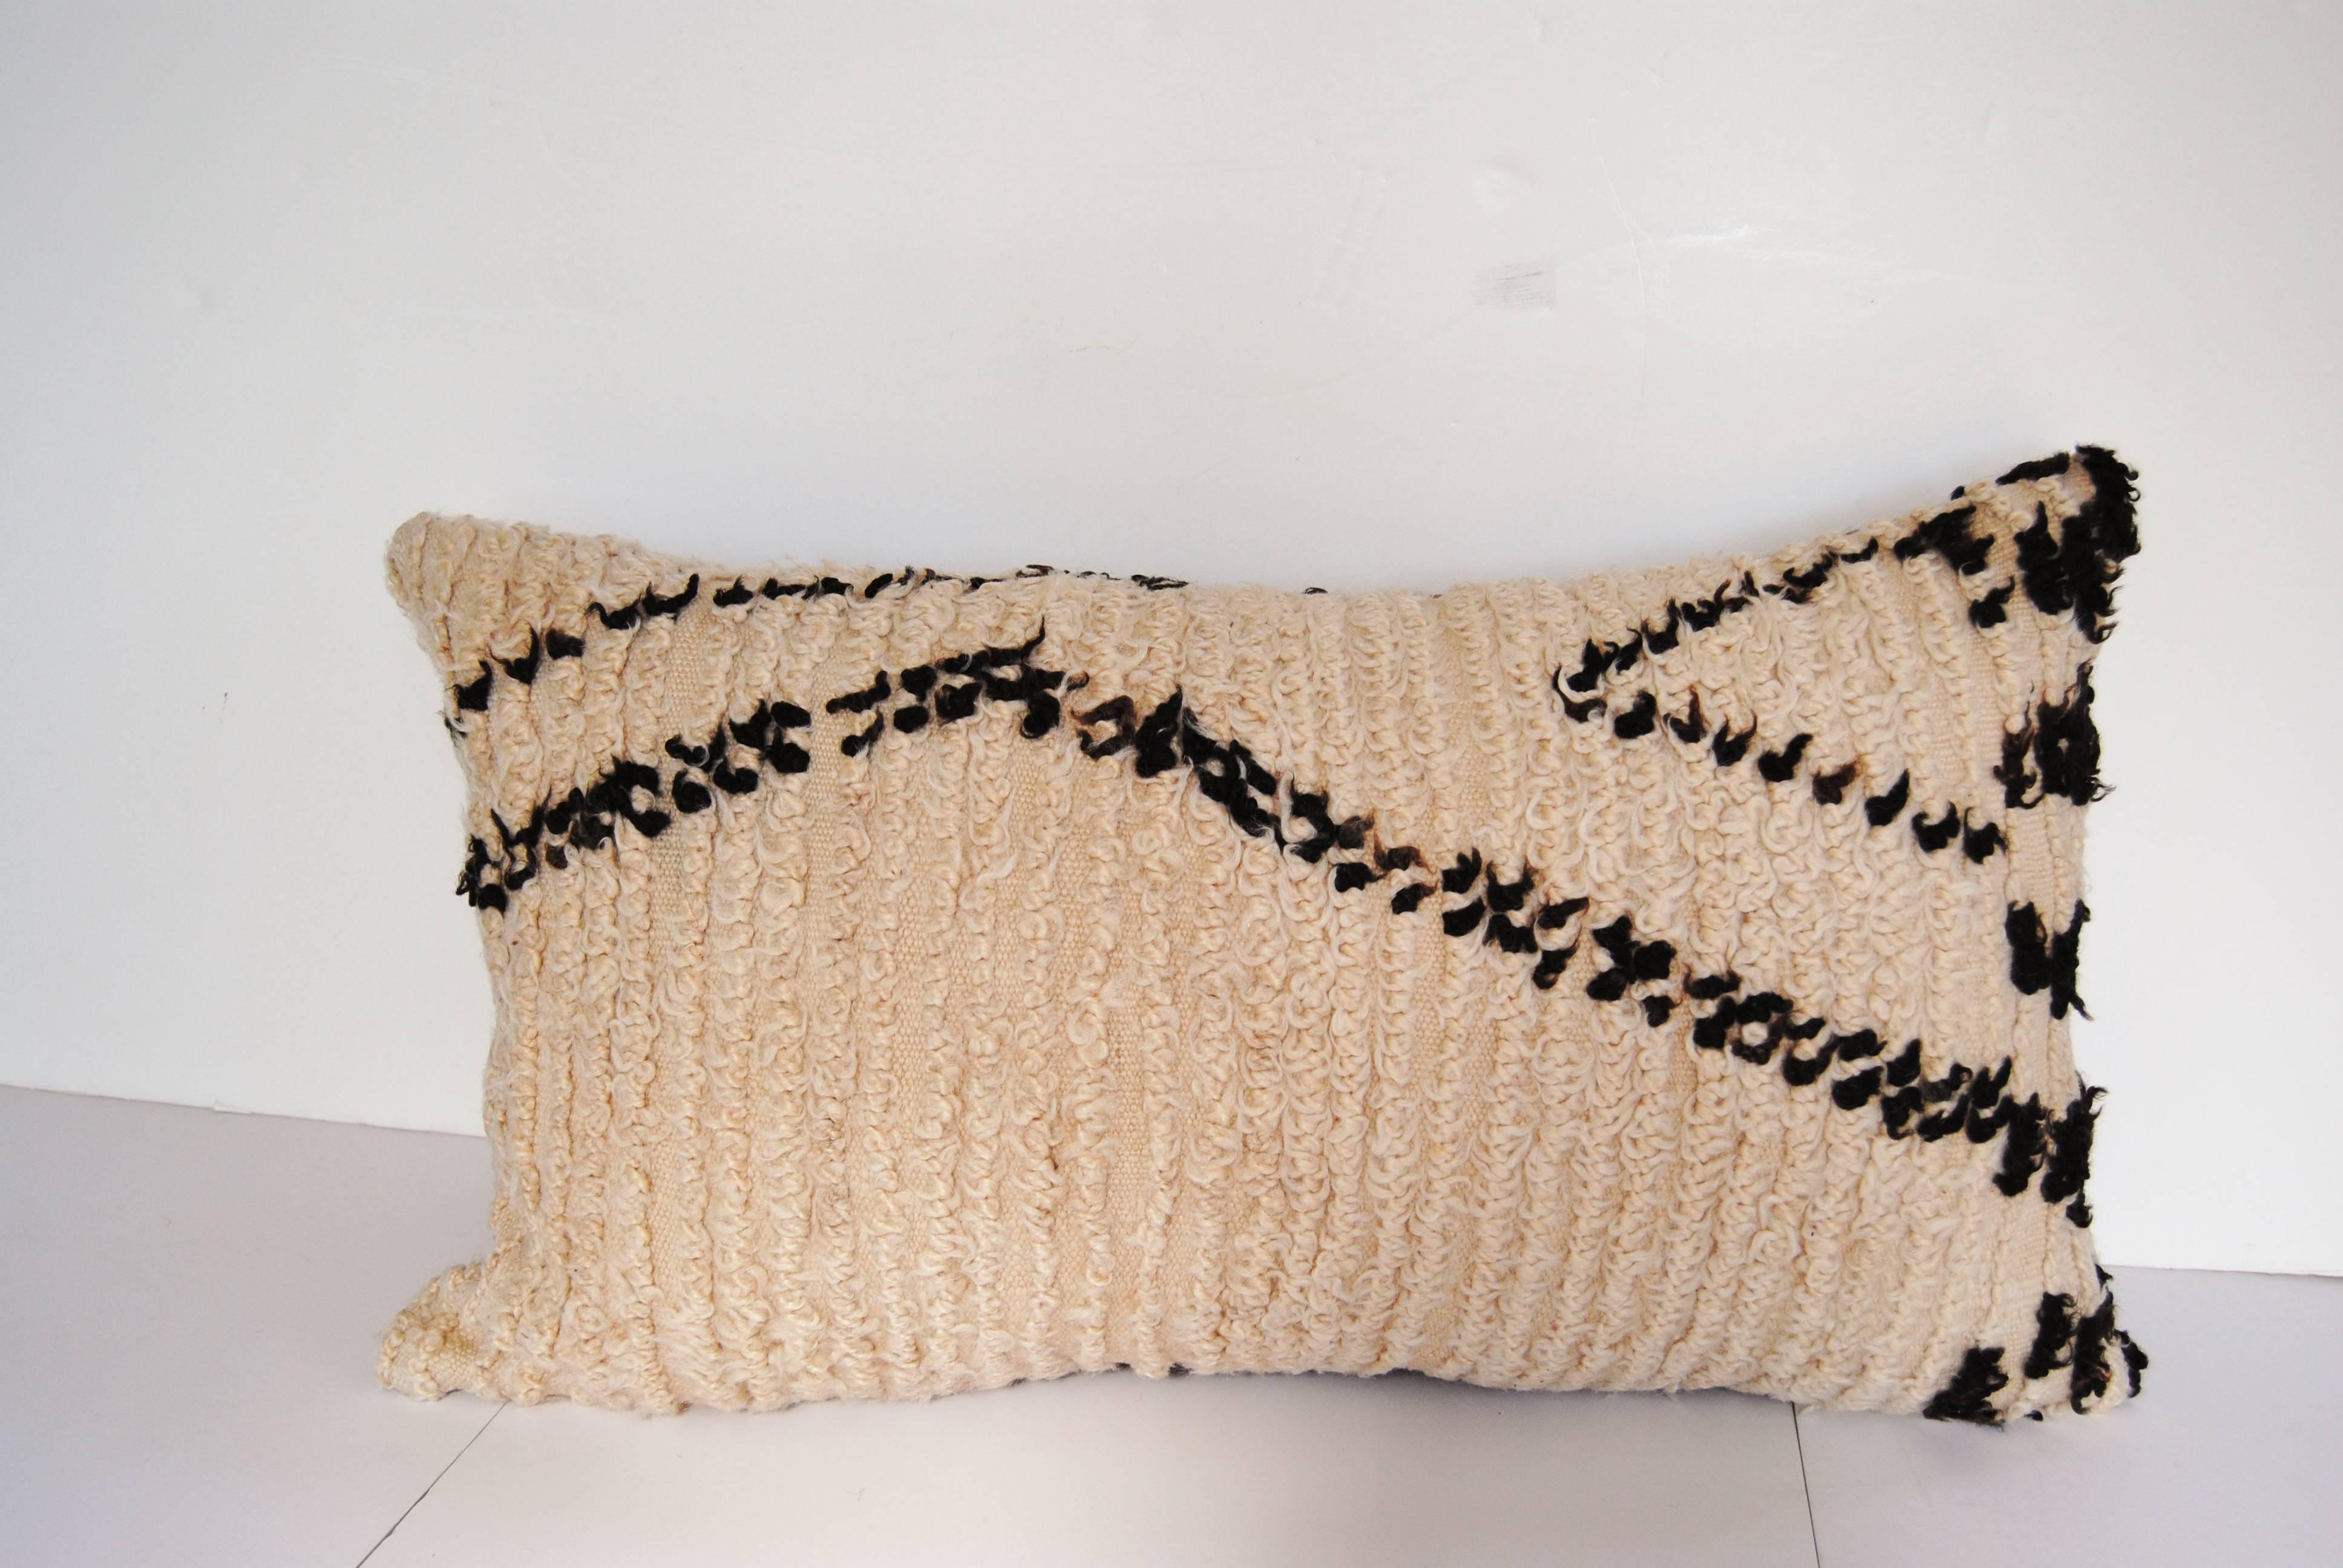 Custom pillow cut from a hand-loomed wool Moroccan Beni Ouarain rug from the Atlas Mountains. Wool is soft and lustrous in natural colors. Pillow is backed in a dark brown linen, filled with an insert of 50/50 down and feathers and hand-sewn closed.